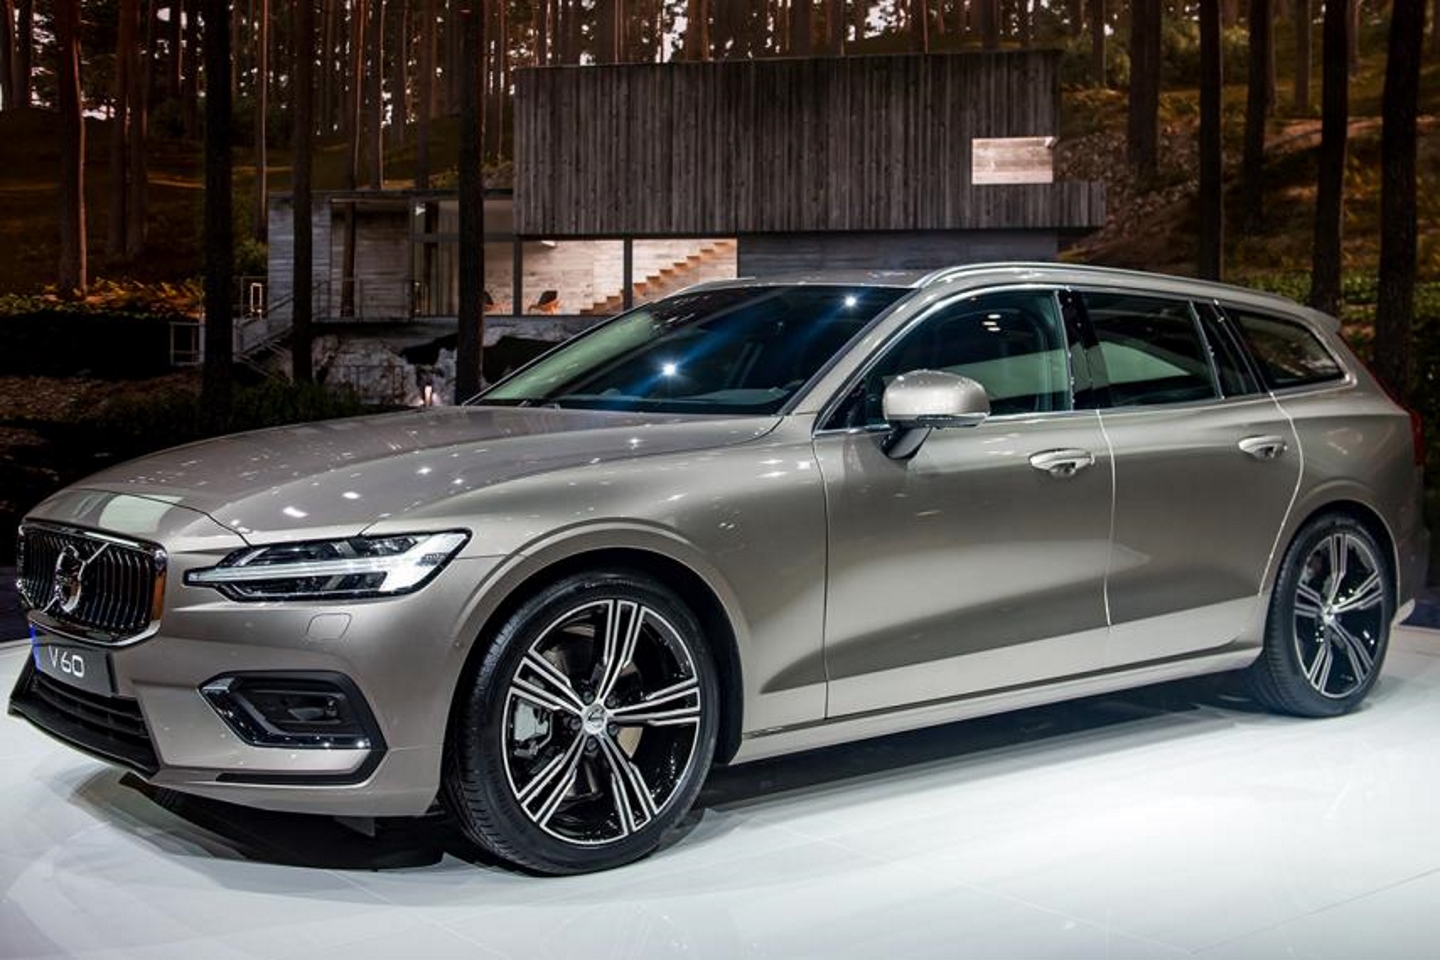 Volvo V 60. Фото: Robert Hradil/Getty Images